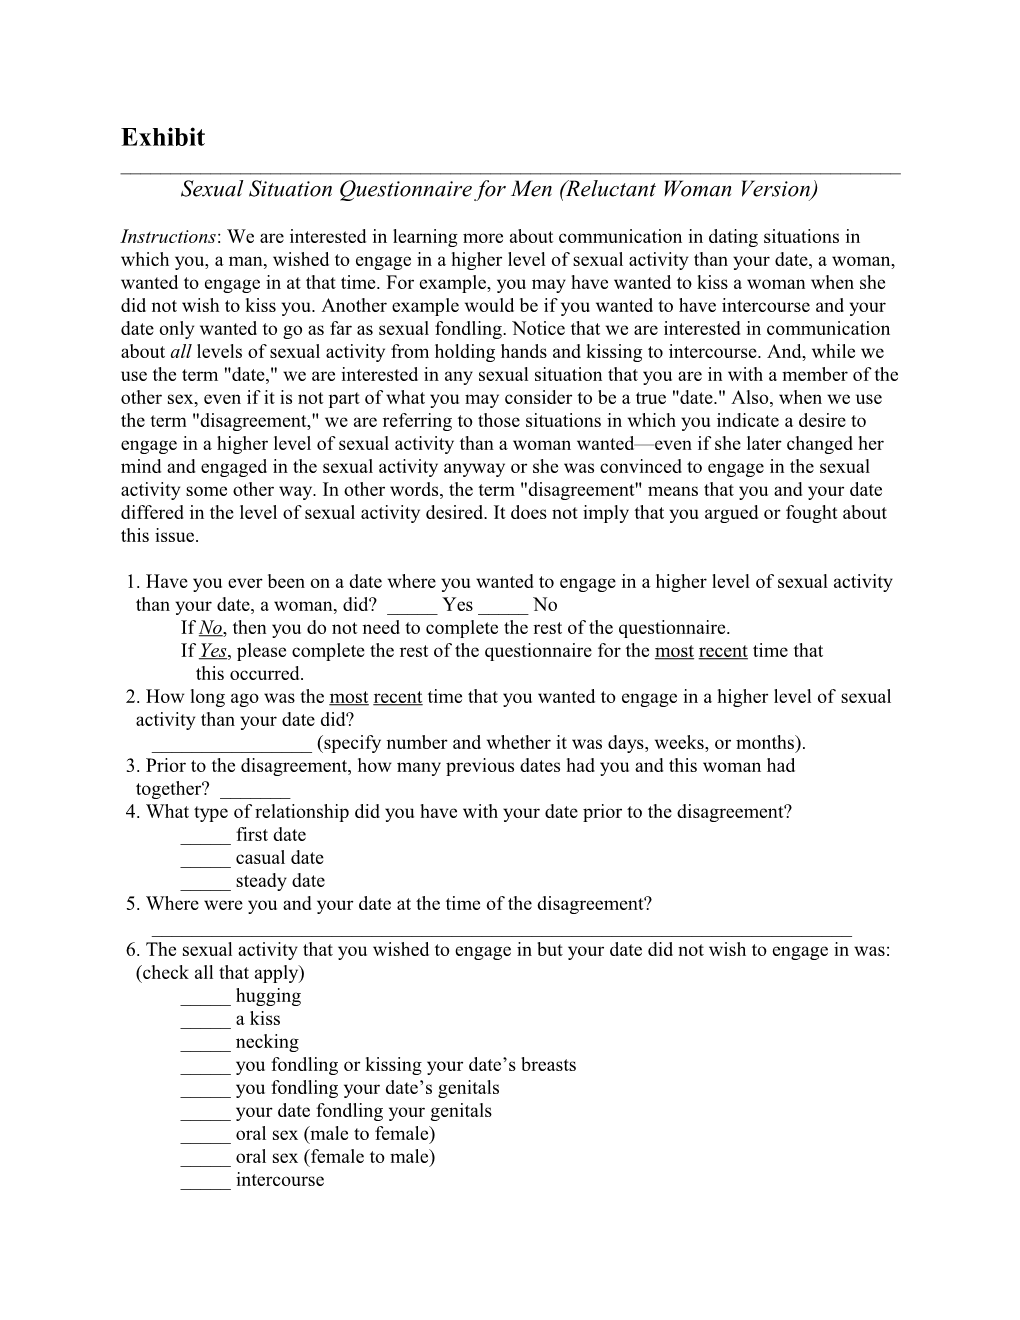 Sexual Situation Questionnaire for Men (Reluctant Woman Version)